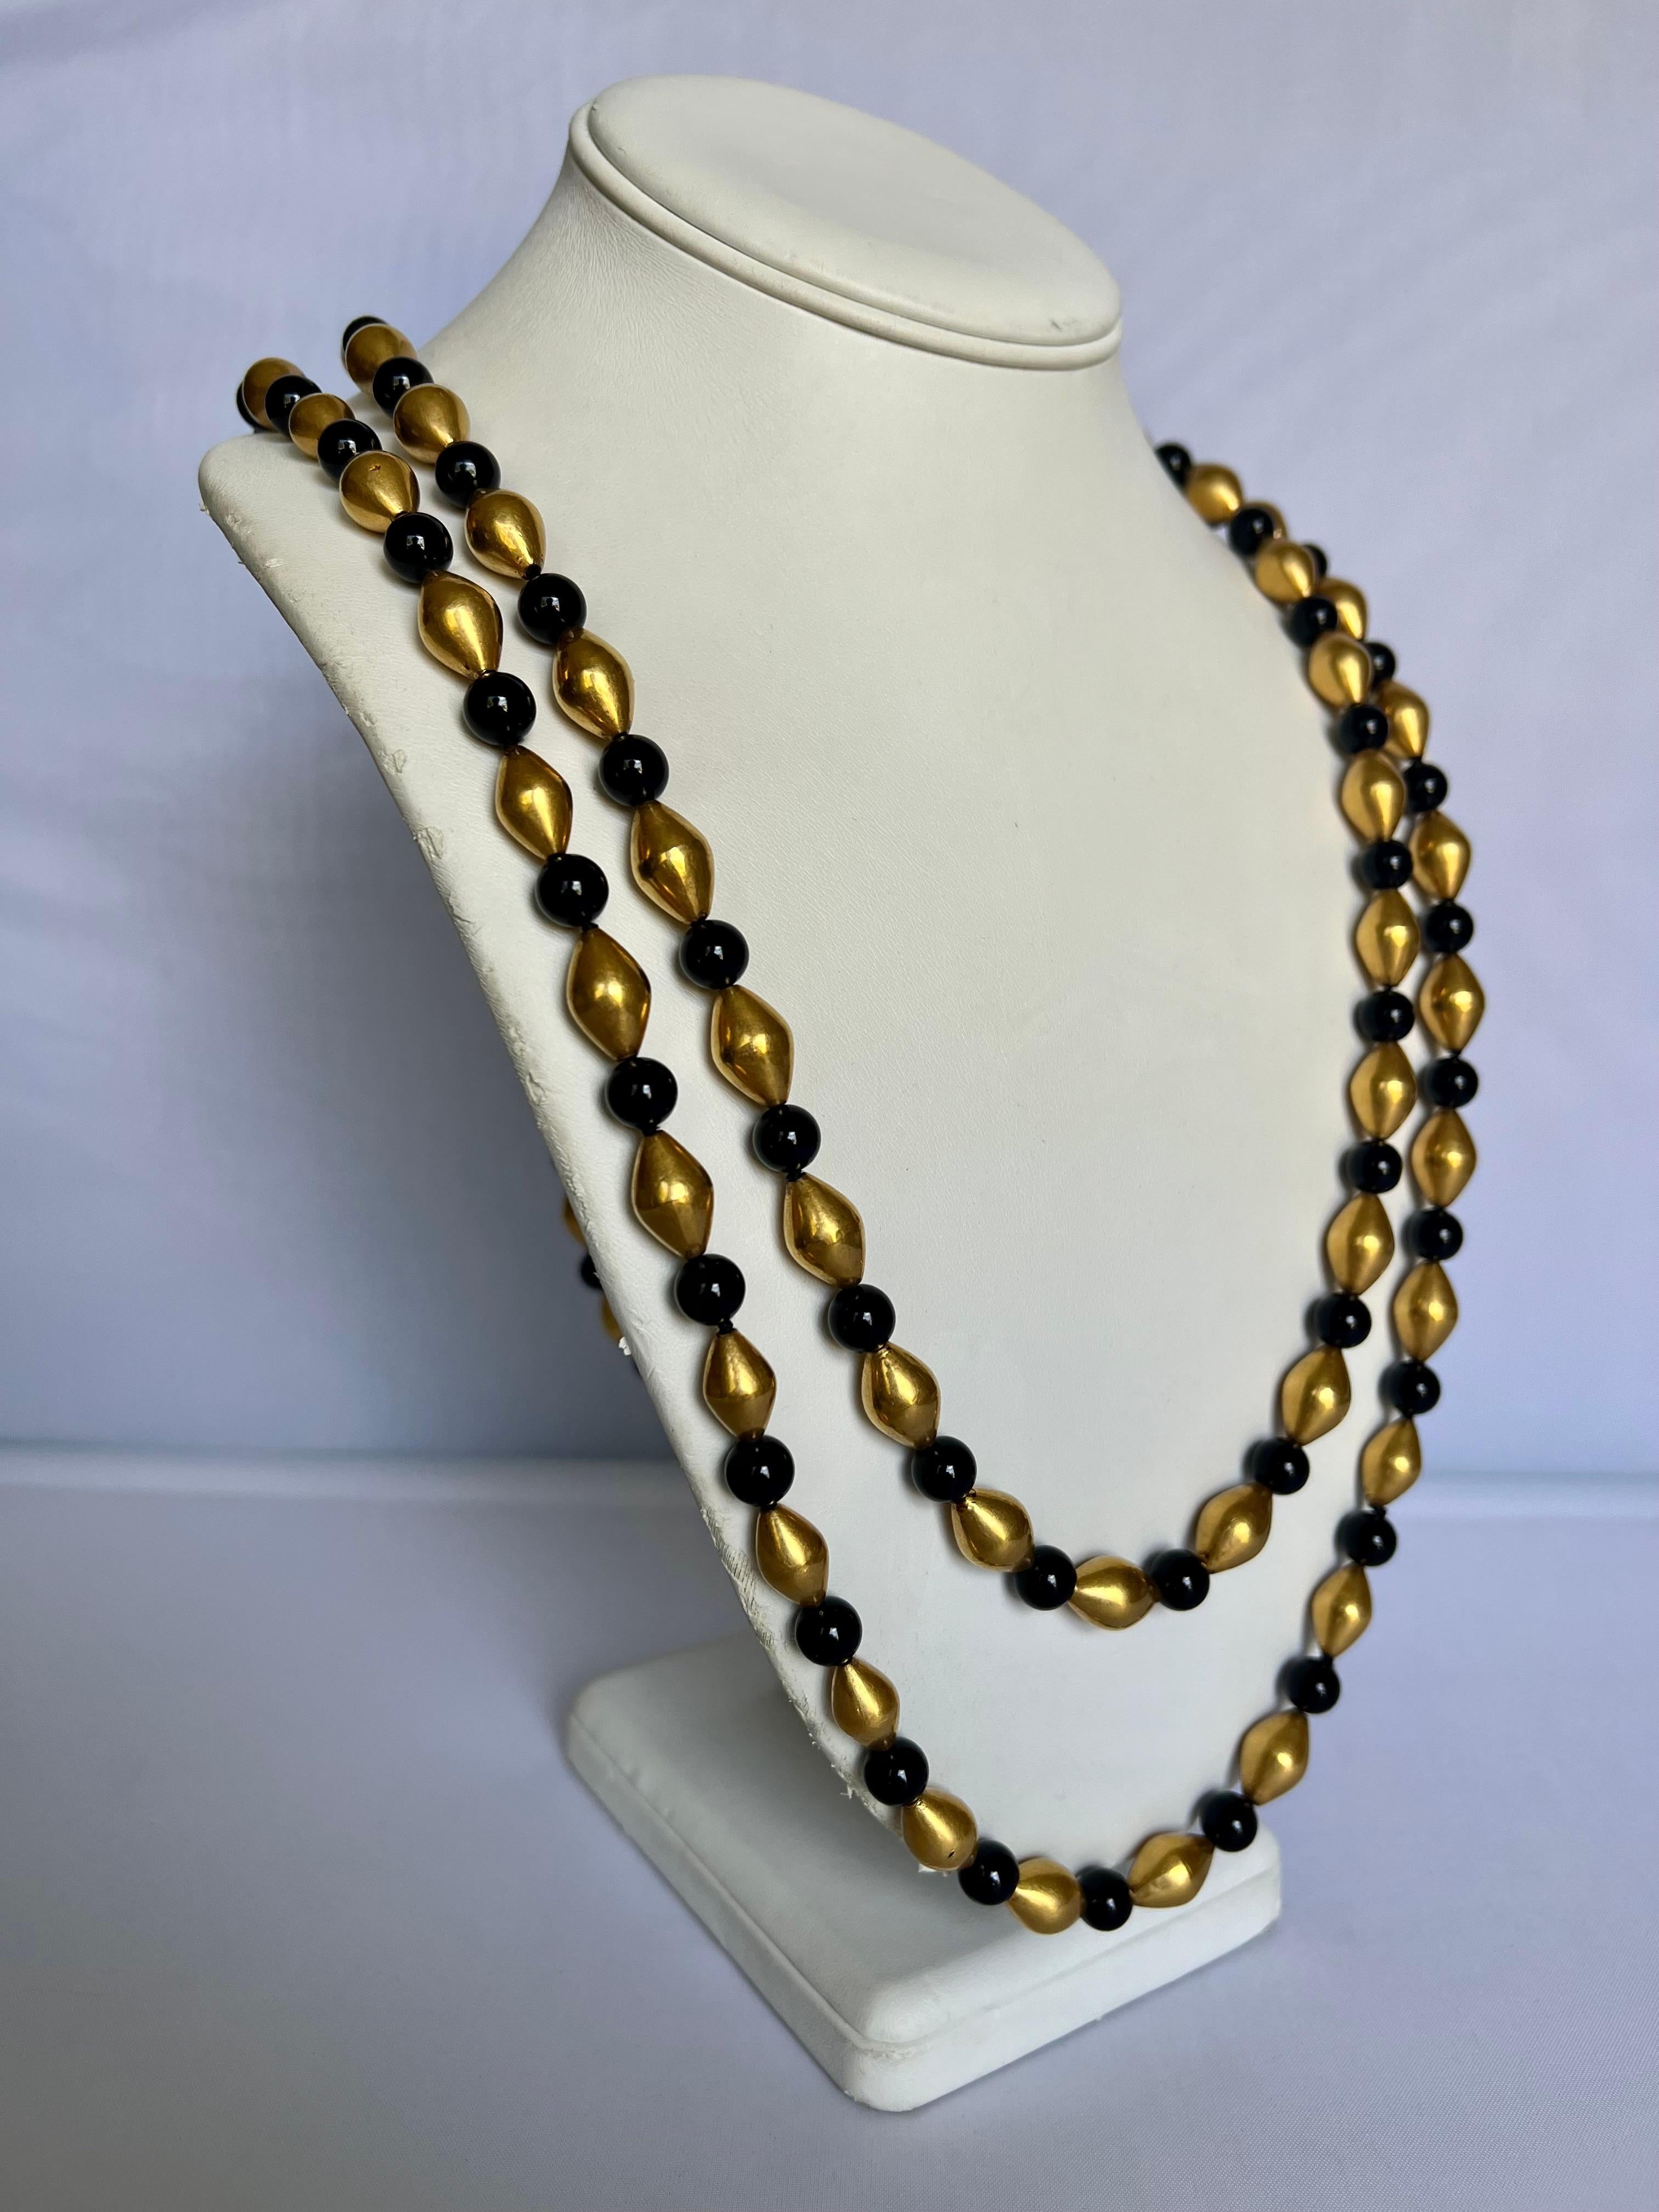 Pair of vintage Chanel beaded sautoir necklaces - comprised of gilt metal angular beads and black 